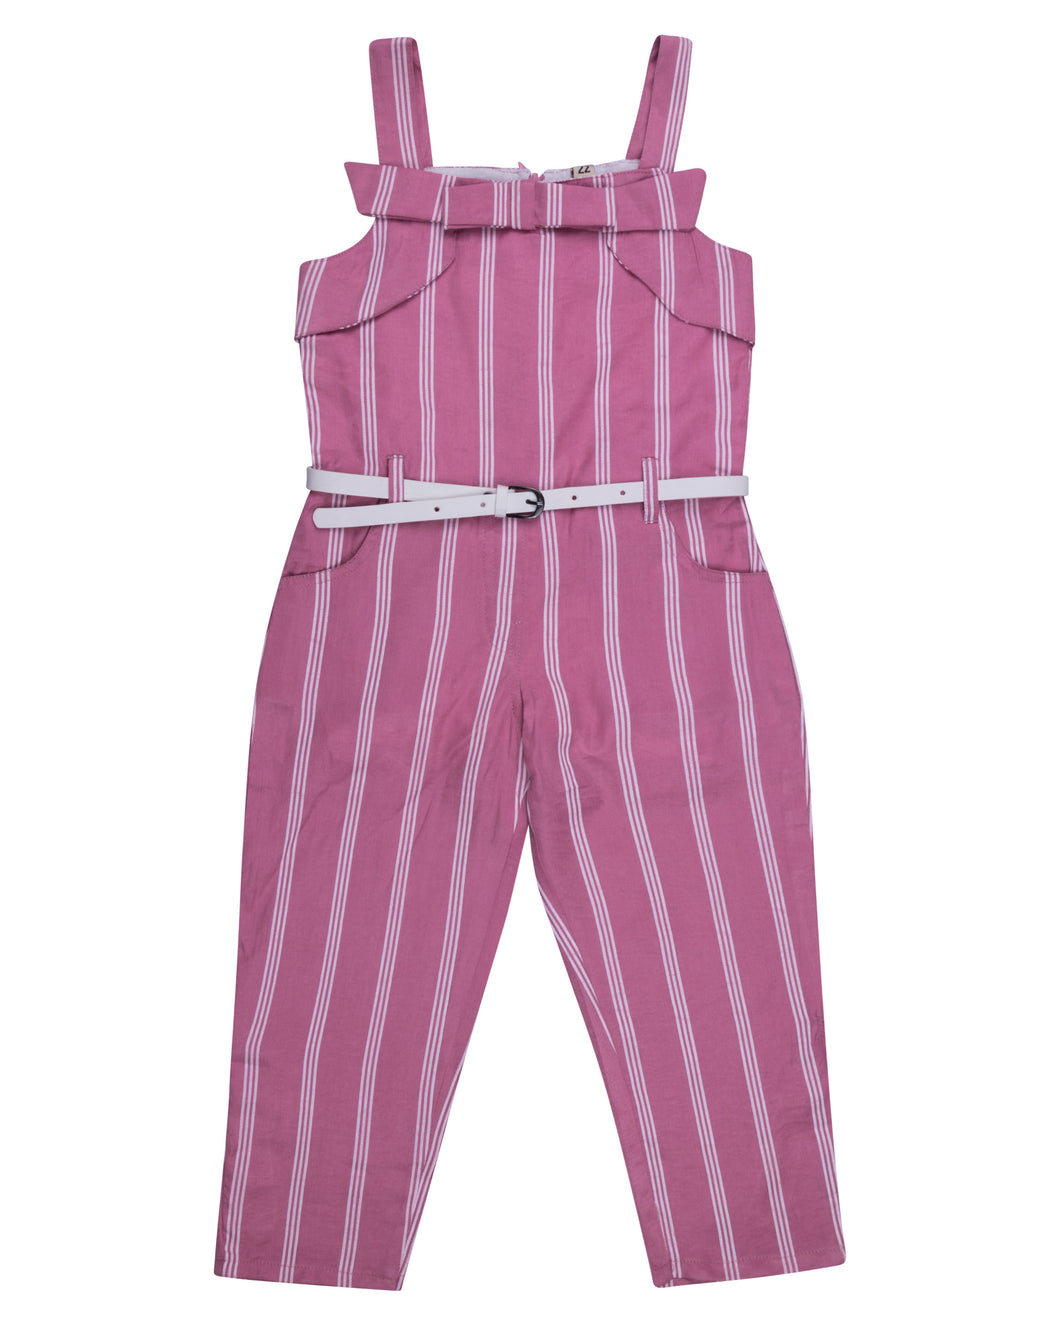 Girls Stiped Pink Full Jump Suit